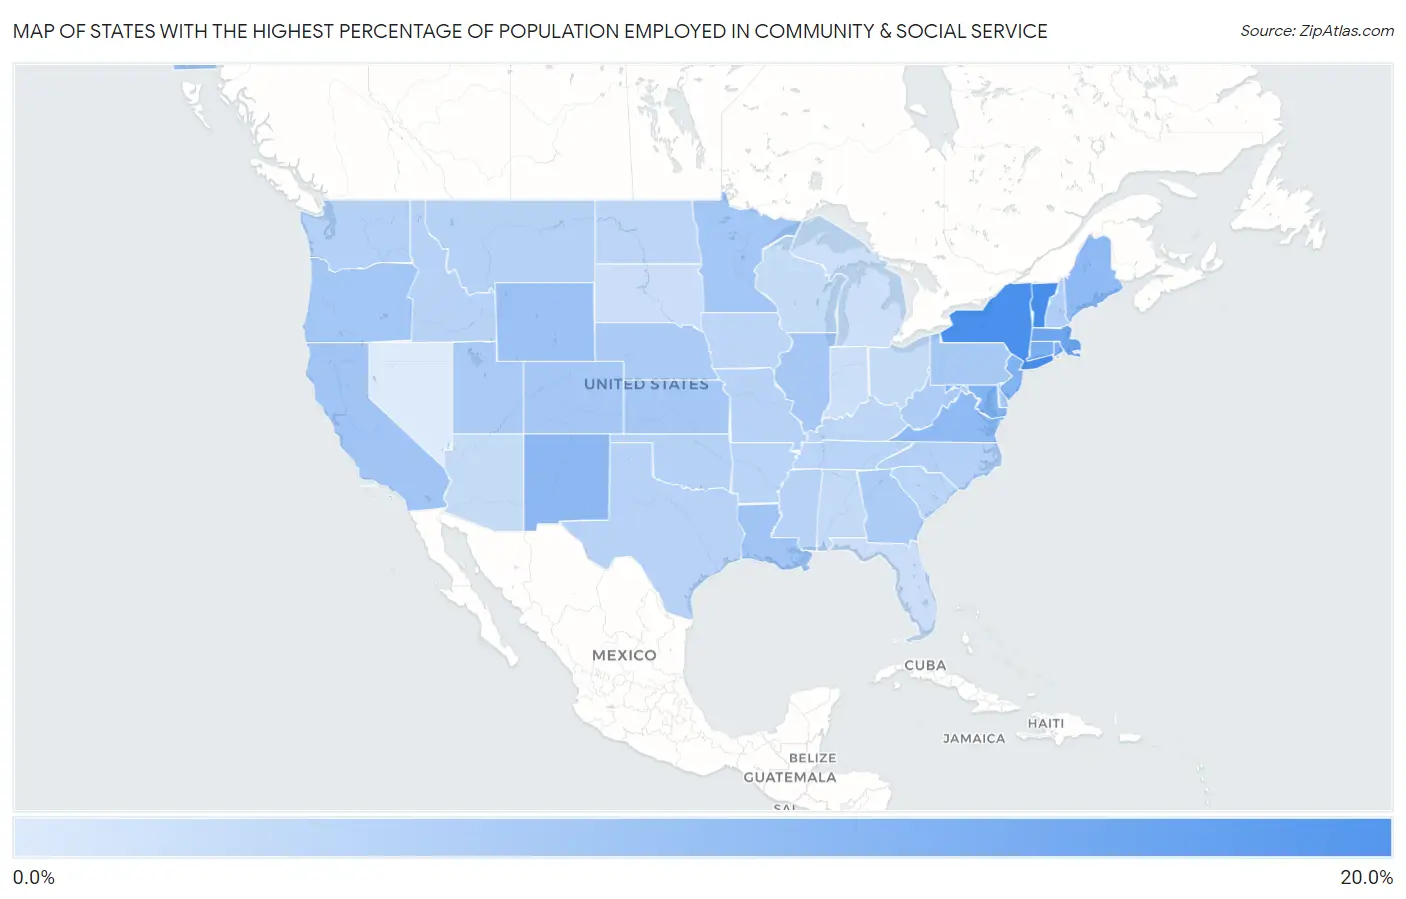 States with the Highest Percentage of Population Employed in Community & Social Service  in the United States Map